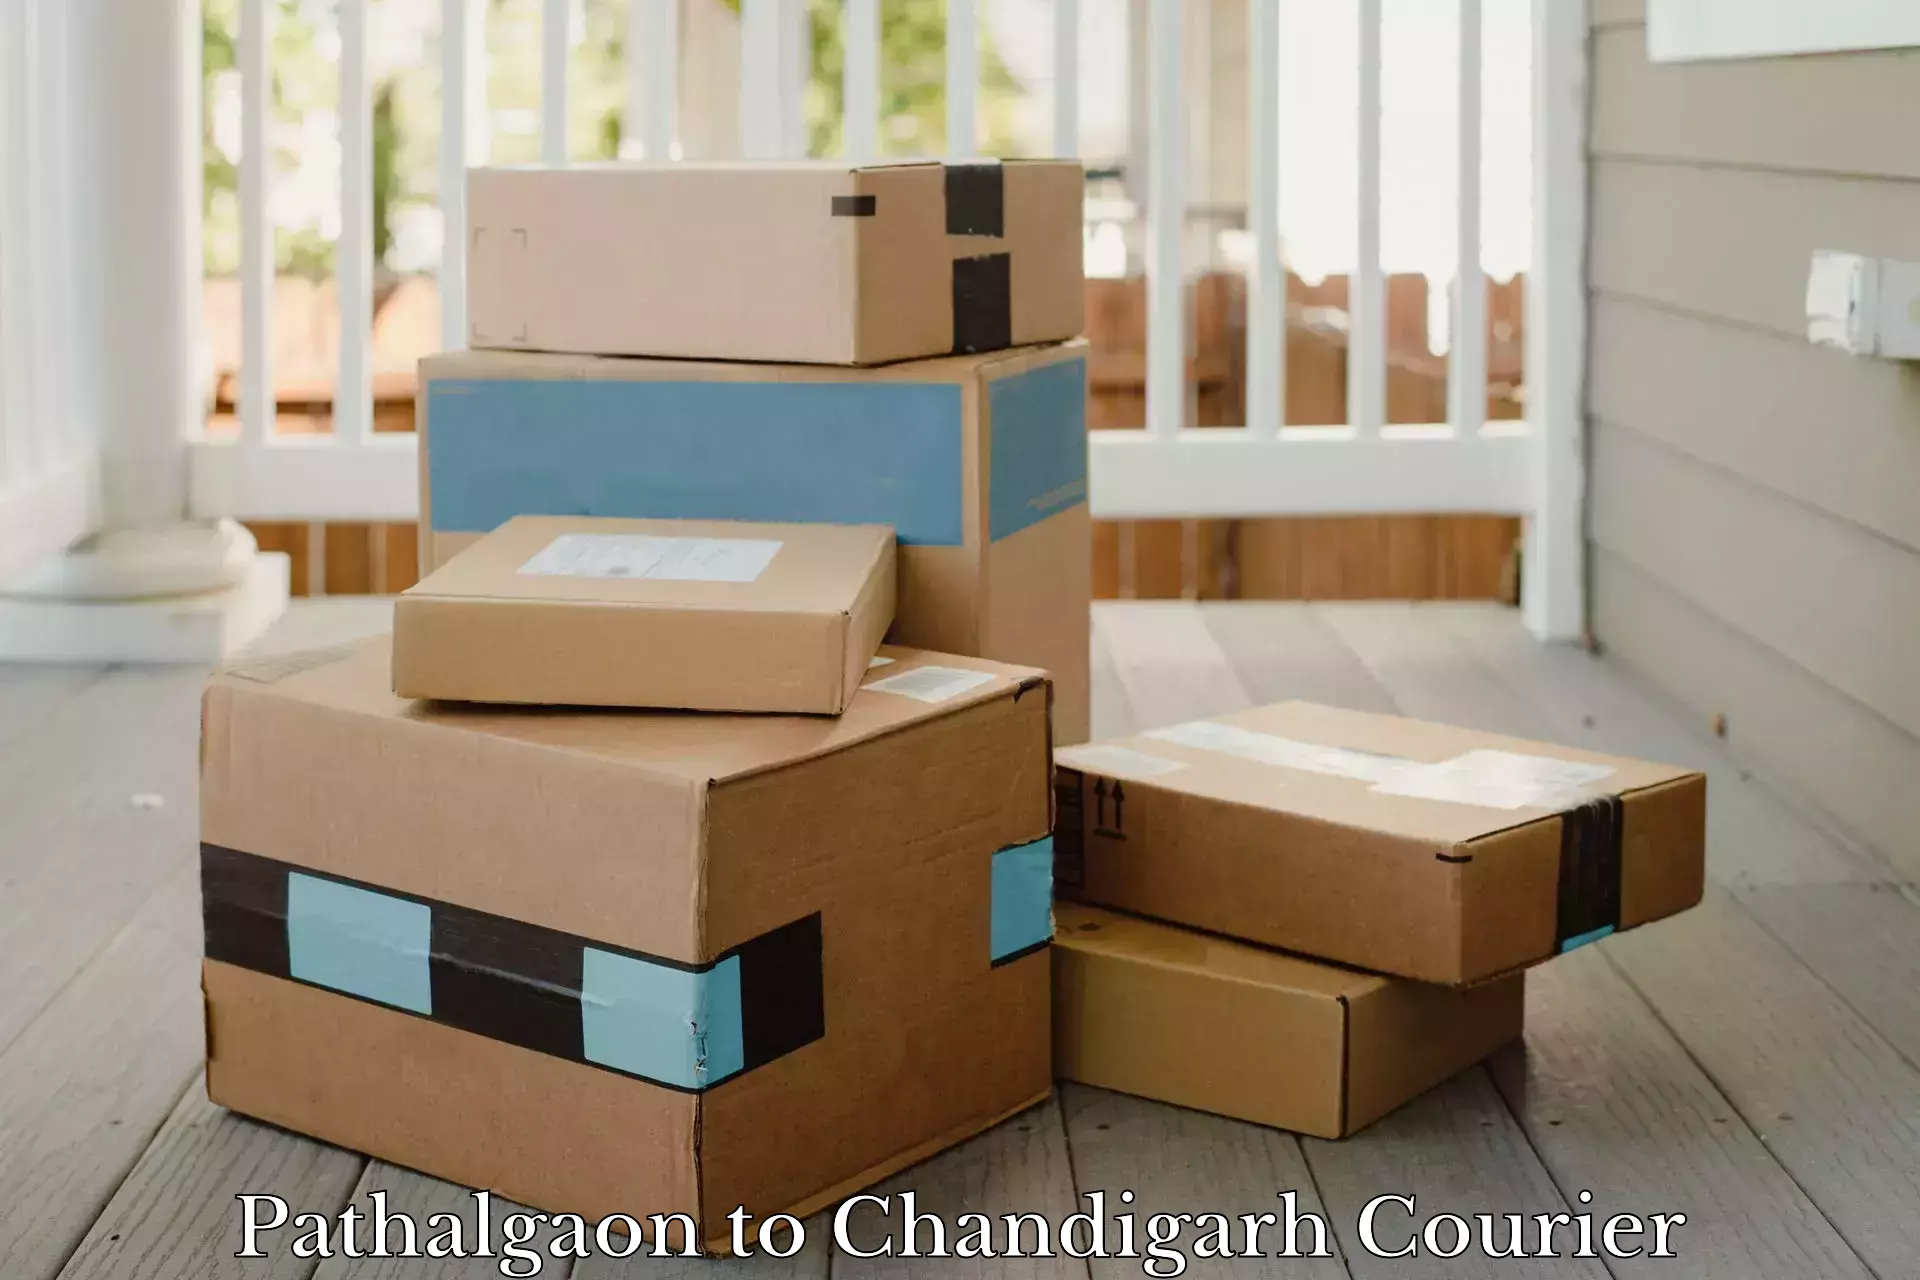 Subscription-based courier Pathalgaon to Chandigarh